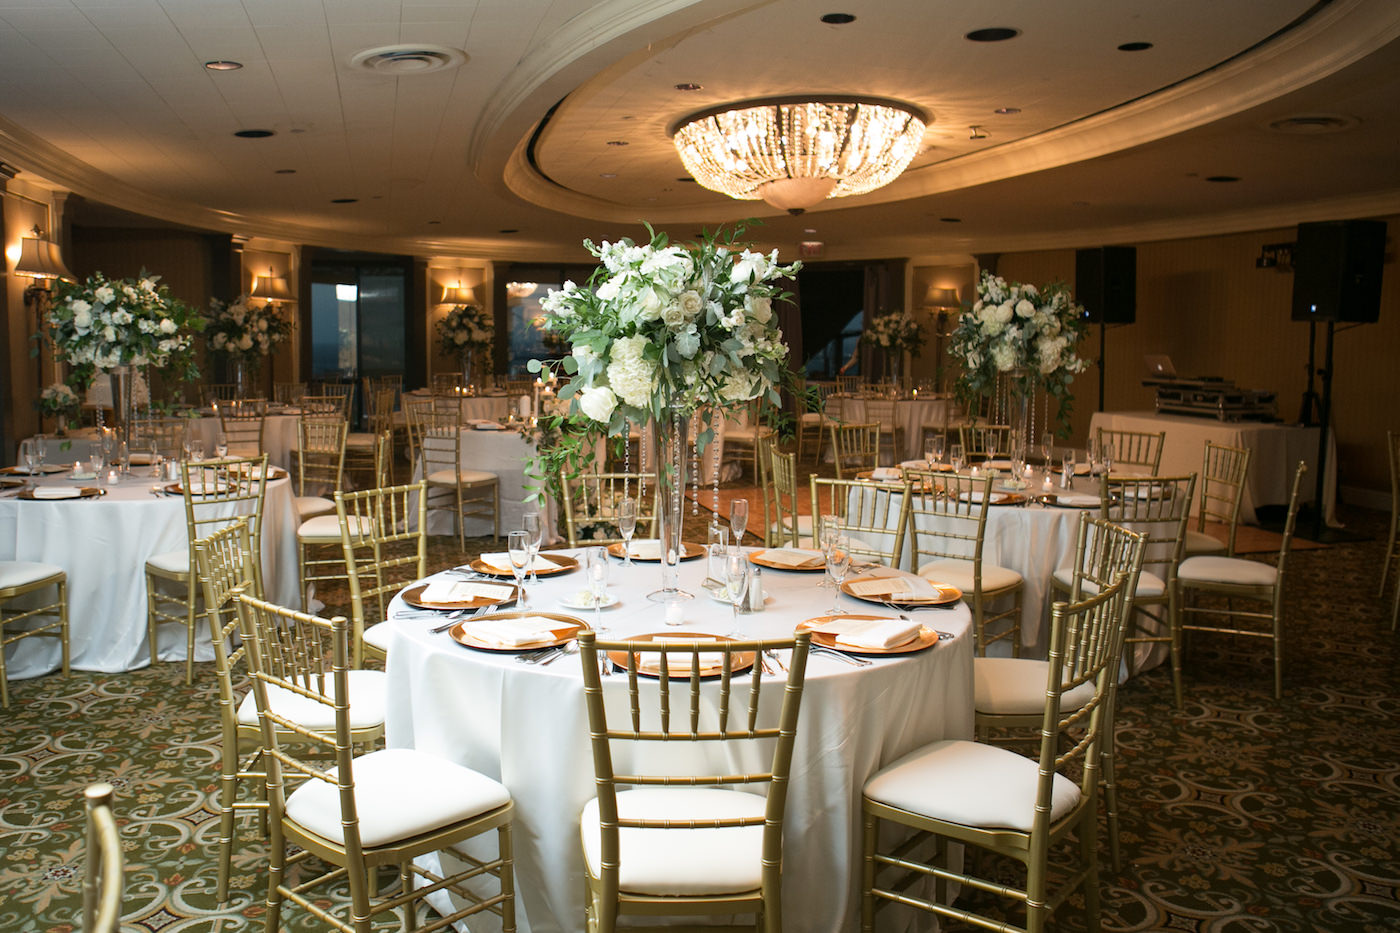 Romantic Classic Wedding Reception Decor, Round Tables with Gold Chiavari Chairs, Tall White Hydrangeas and Roses with Greenery and Hanging Crystals Floral Centerpieces, Gold Chargers | Wedding Photographer Carrie Wildes Photography | Ballroom Wedding Venue The Tampa Club